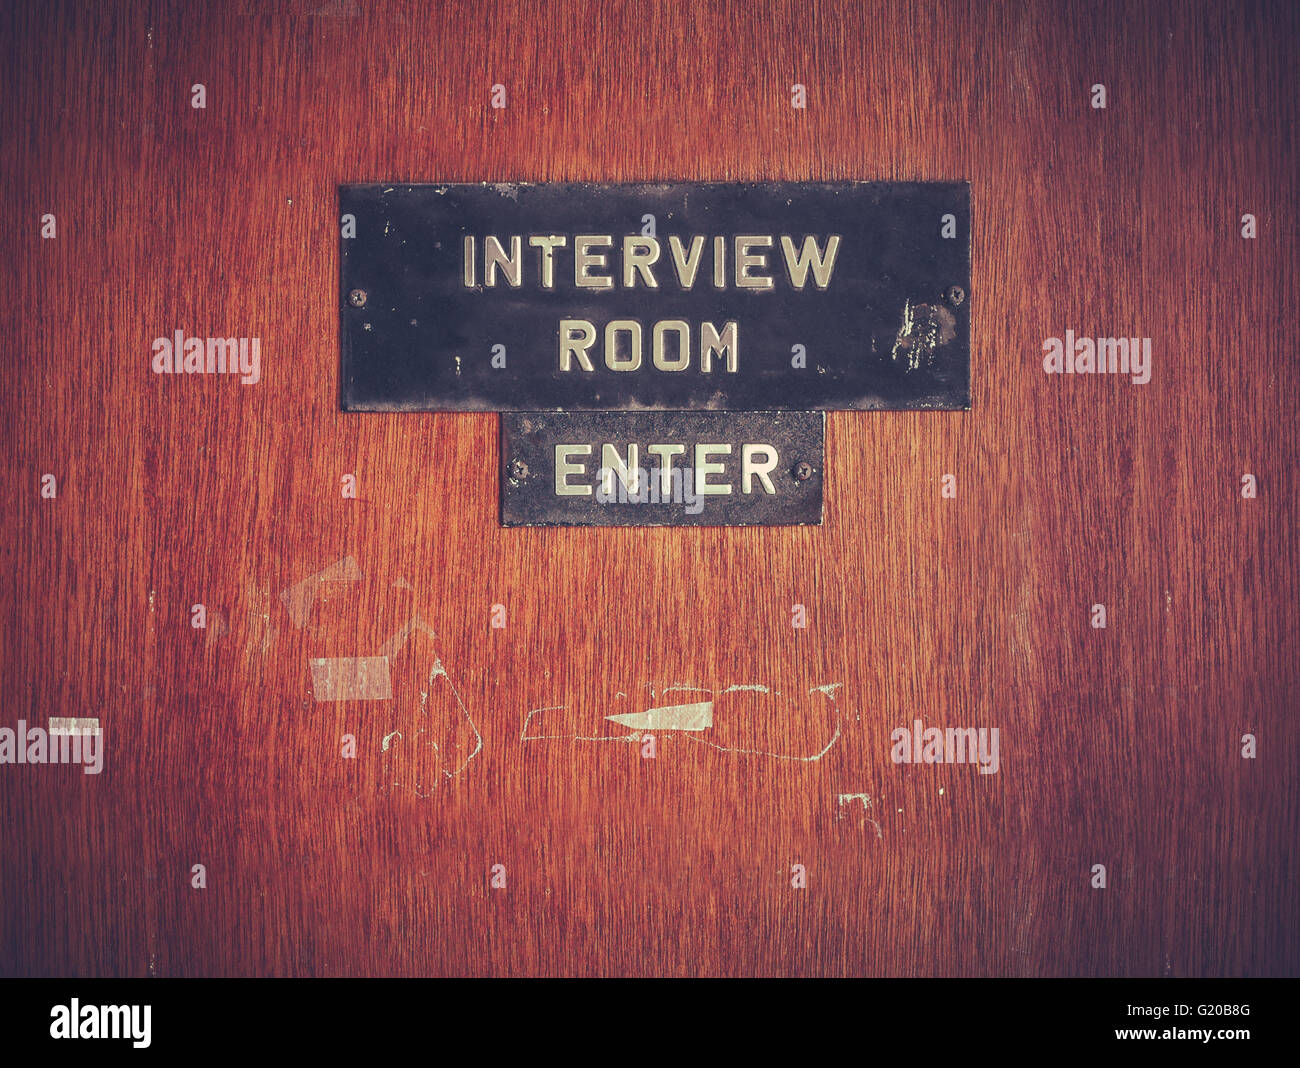 Retro Filtered Image Of A Grungy Interview Room Door Stock Photo